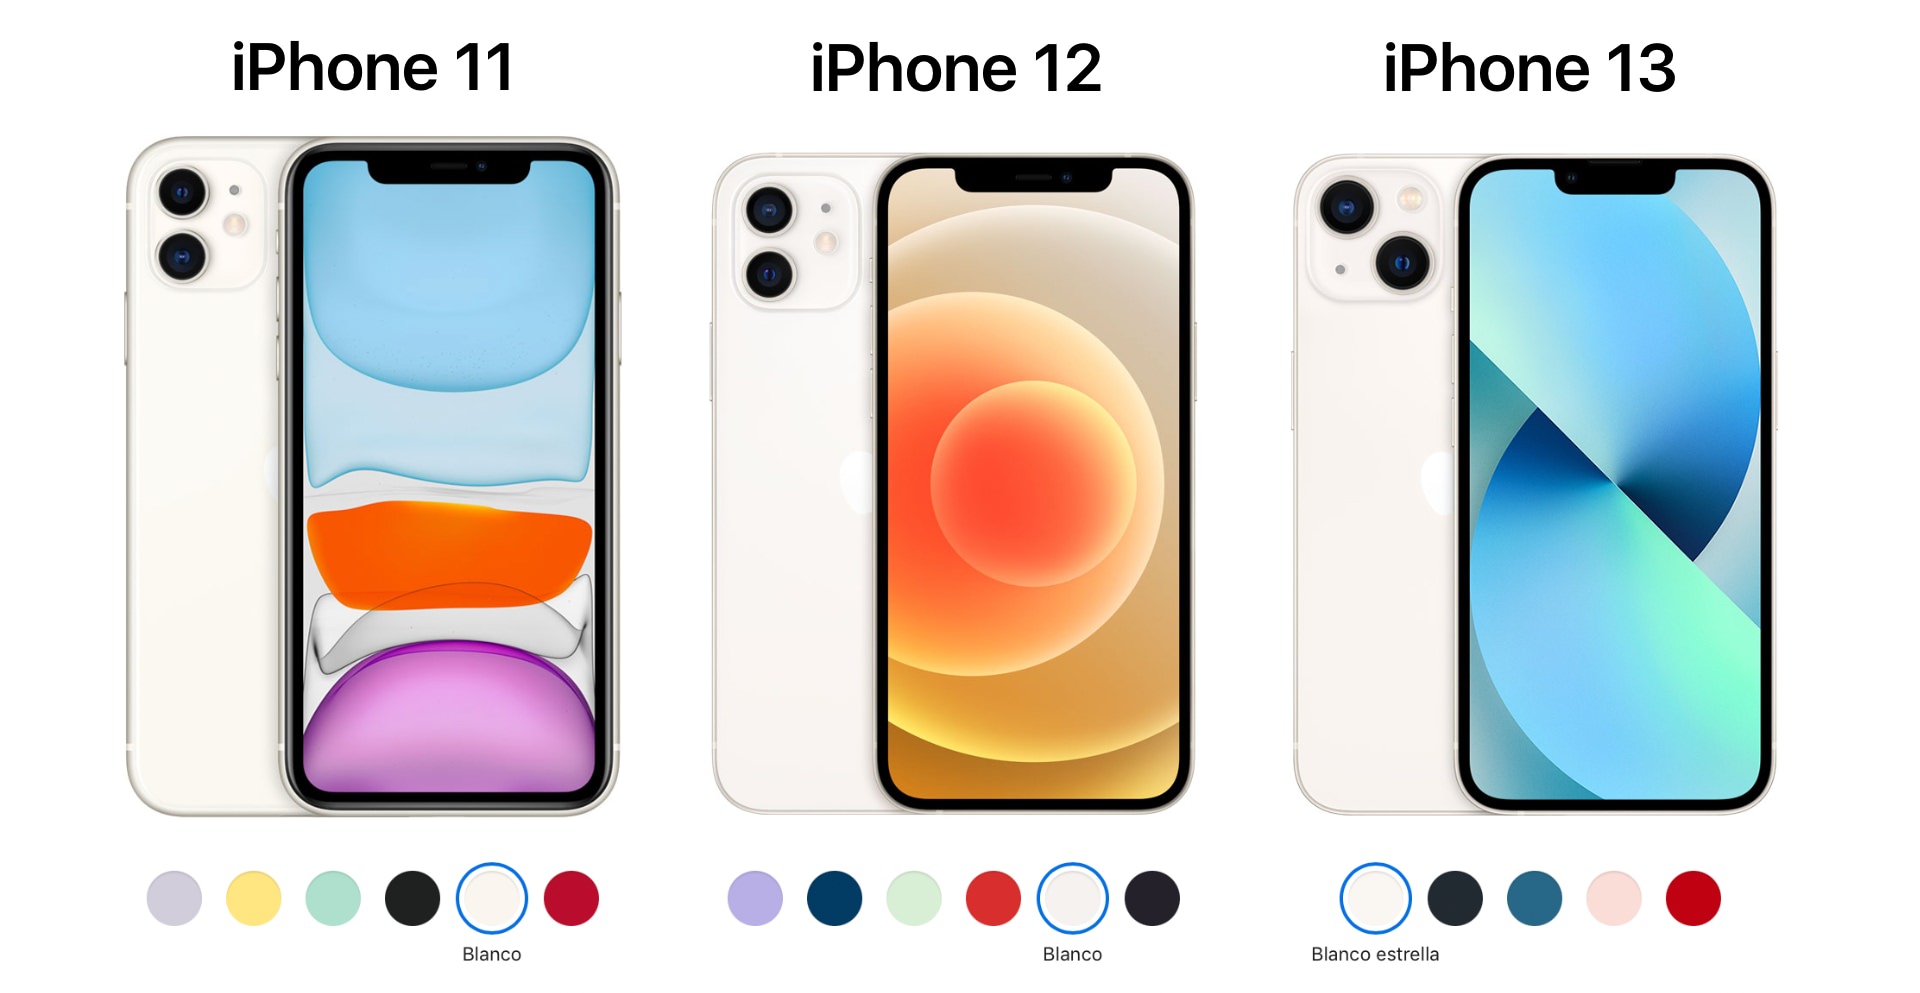 iPhone 11 vs iPhone 8 Plus: Which is for you?